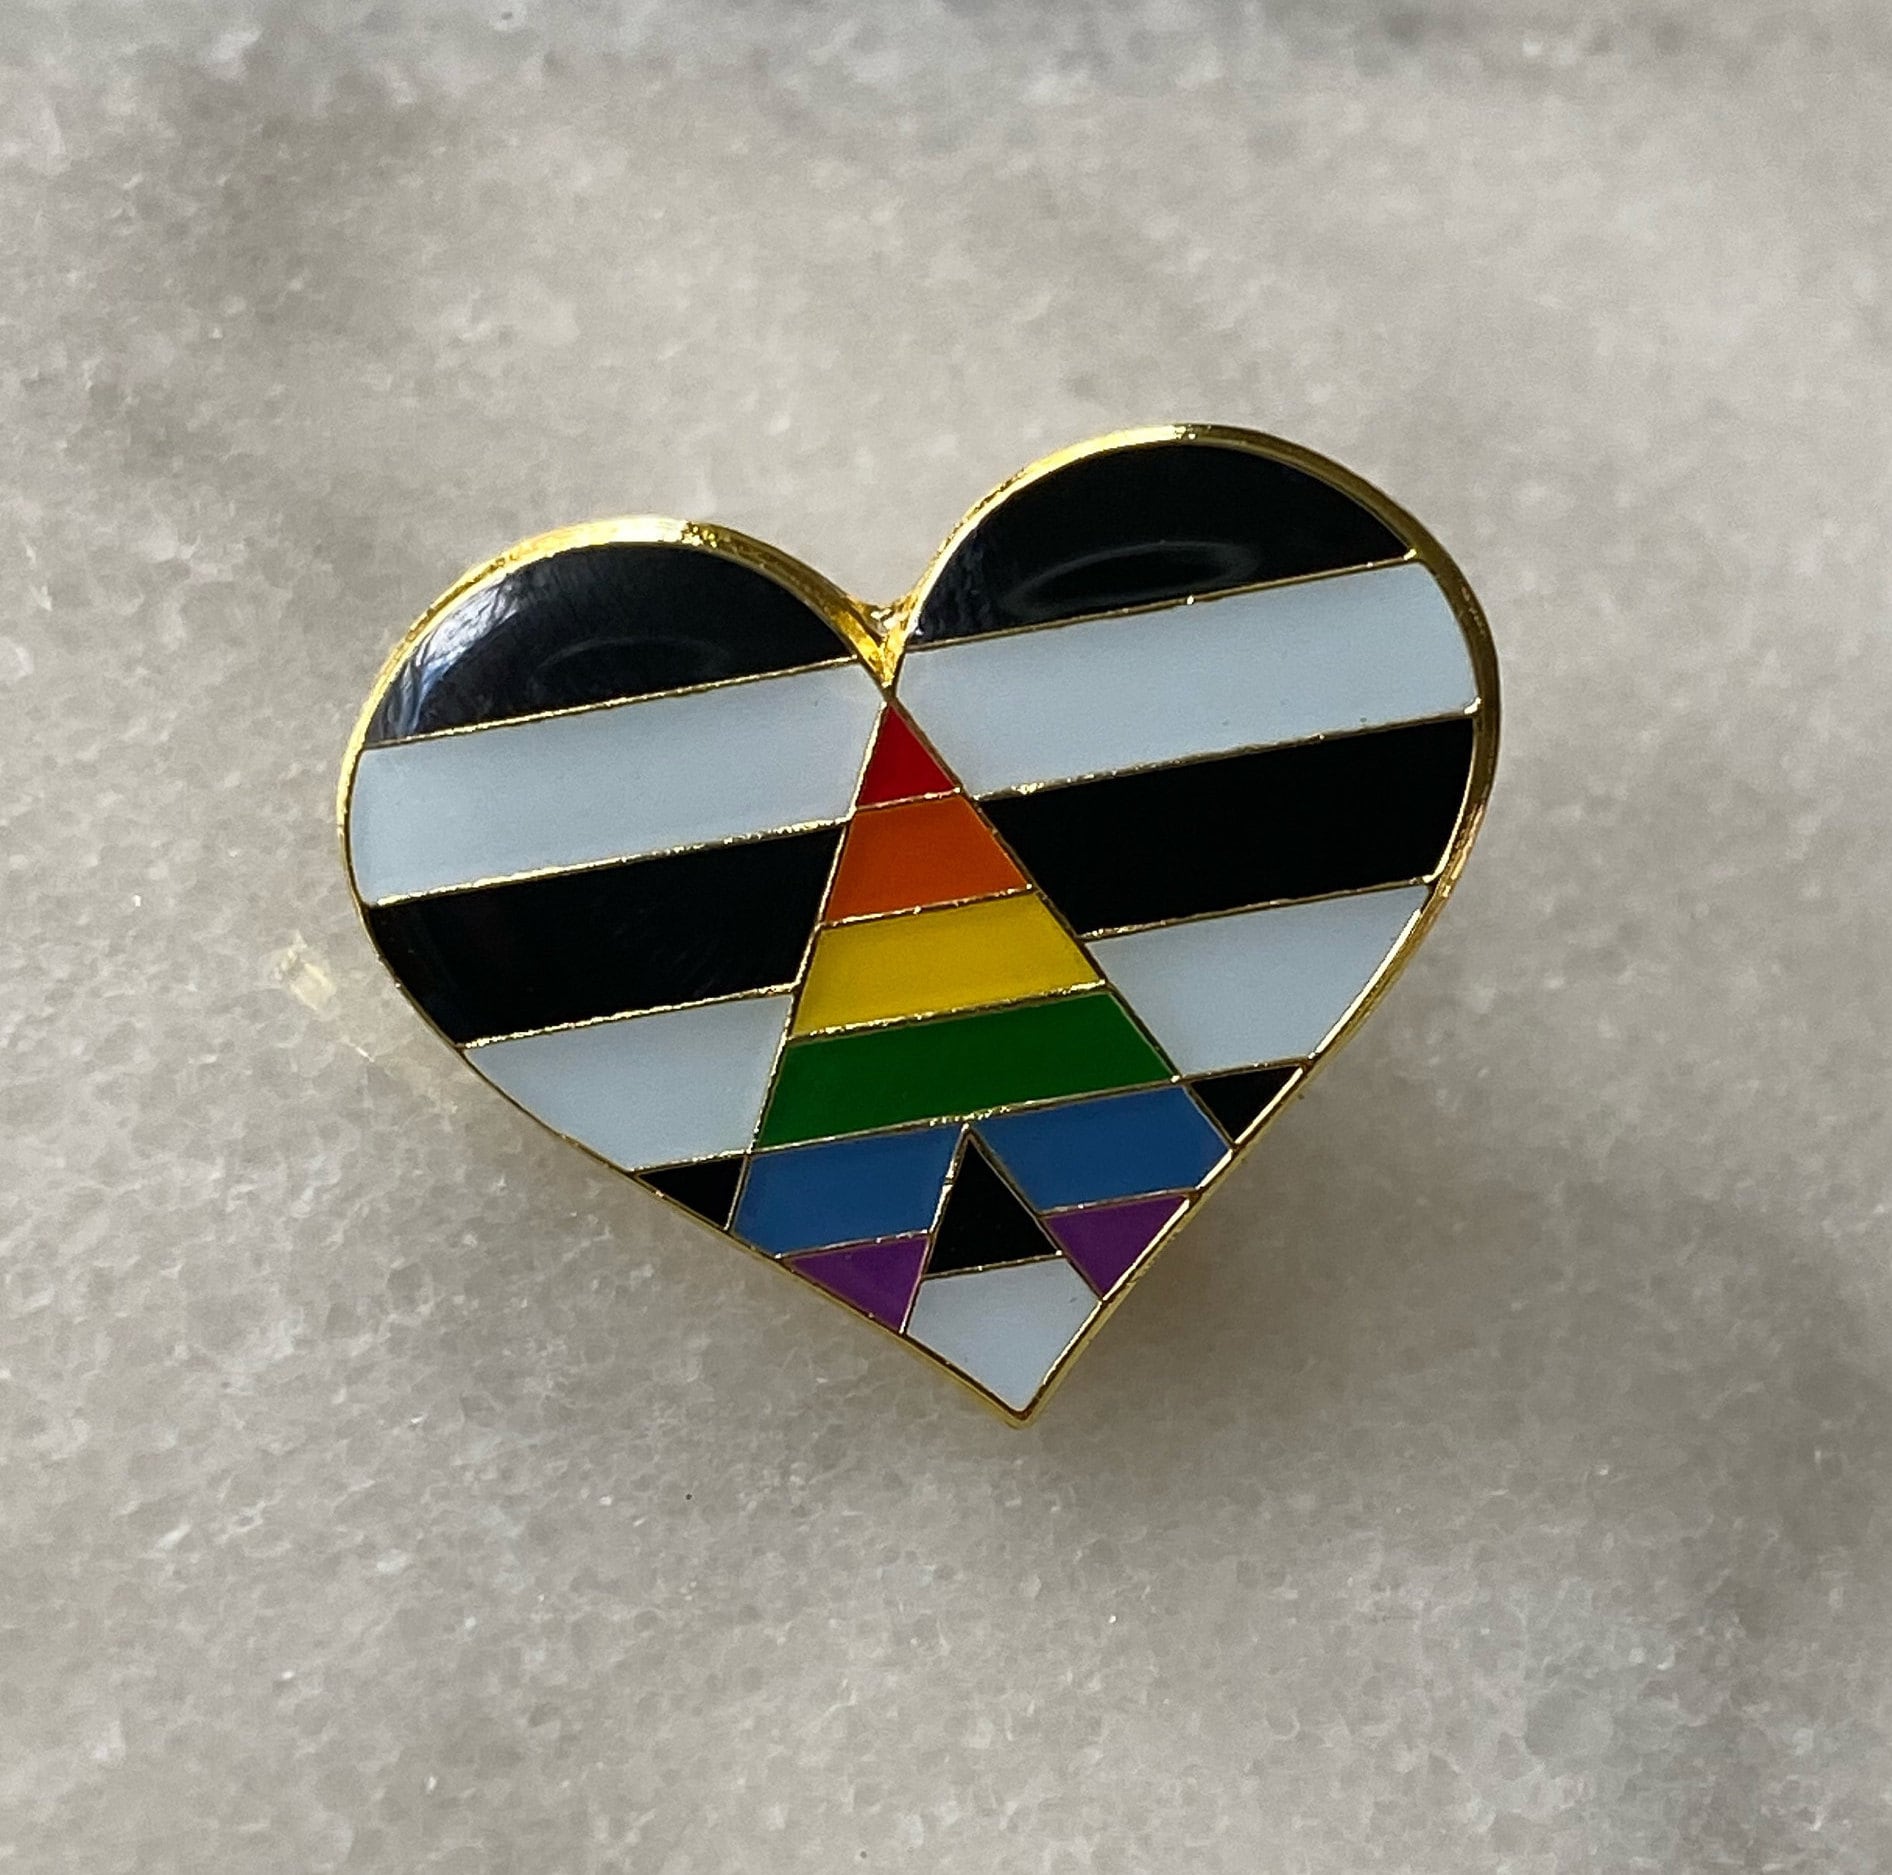 Straight Ally Heart Pride Flag Pins | Enameled LGBTQ Supporter Ally Equality Lapel Badge - ActivistChic